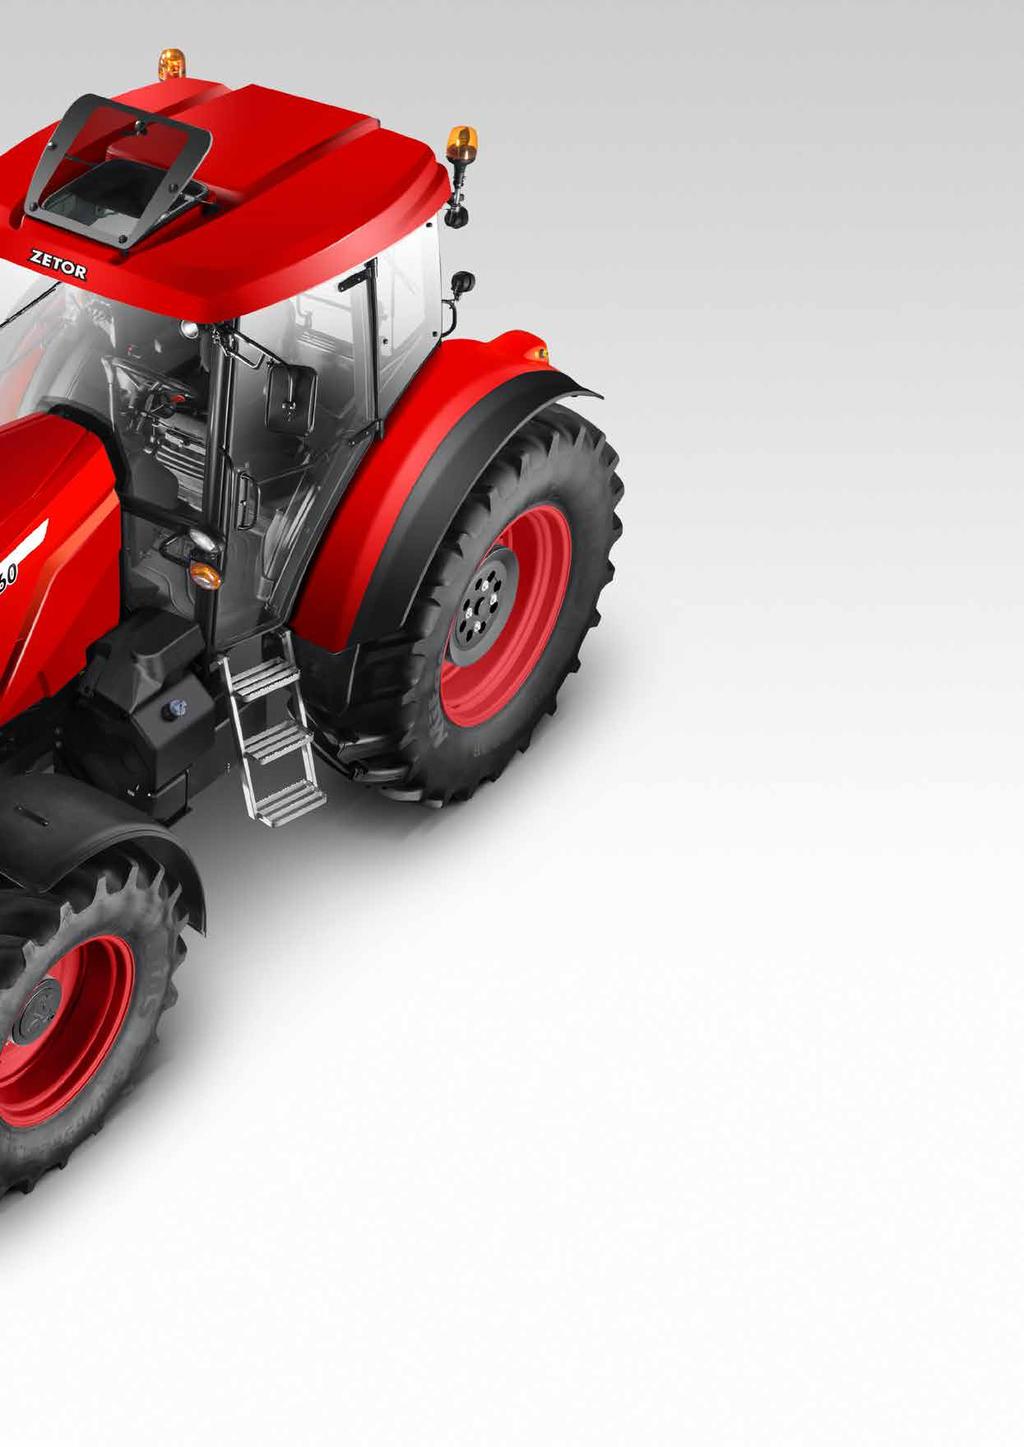 DESIGN The timeless design of ZETOR CRYSTAL tractors builds on the original, legendary CRYSTAL, which was manufactured from 1964 and won passionate admiration from users all over the world.